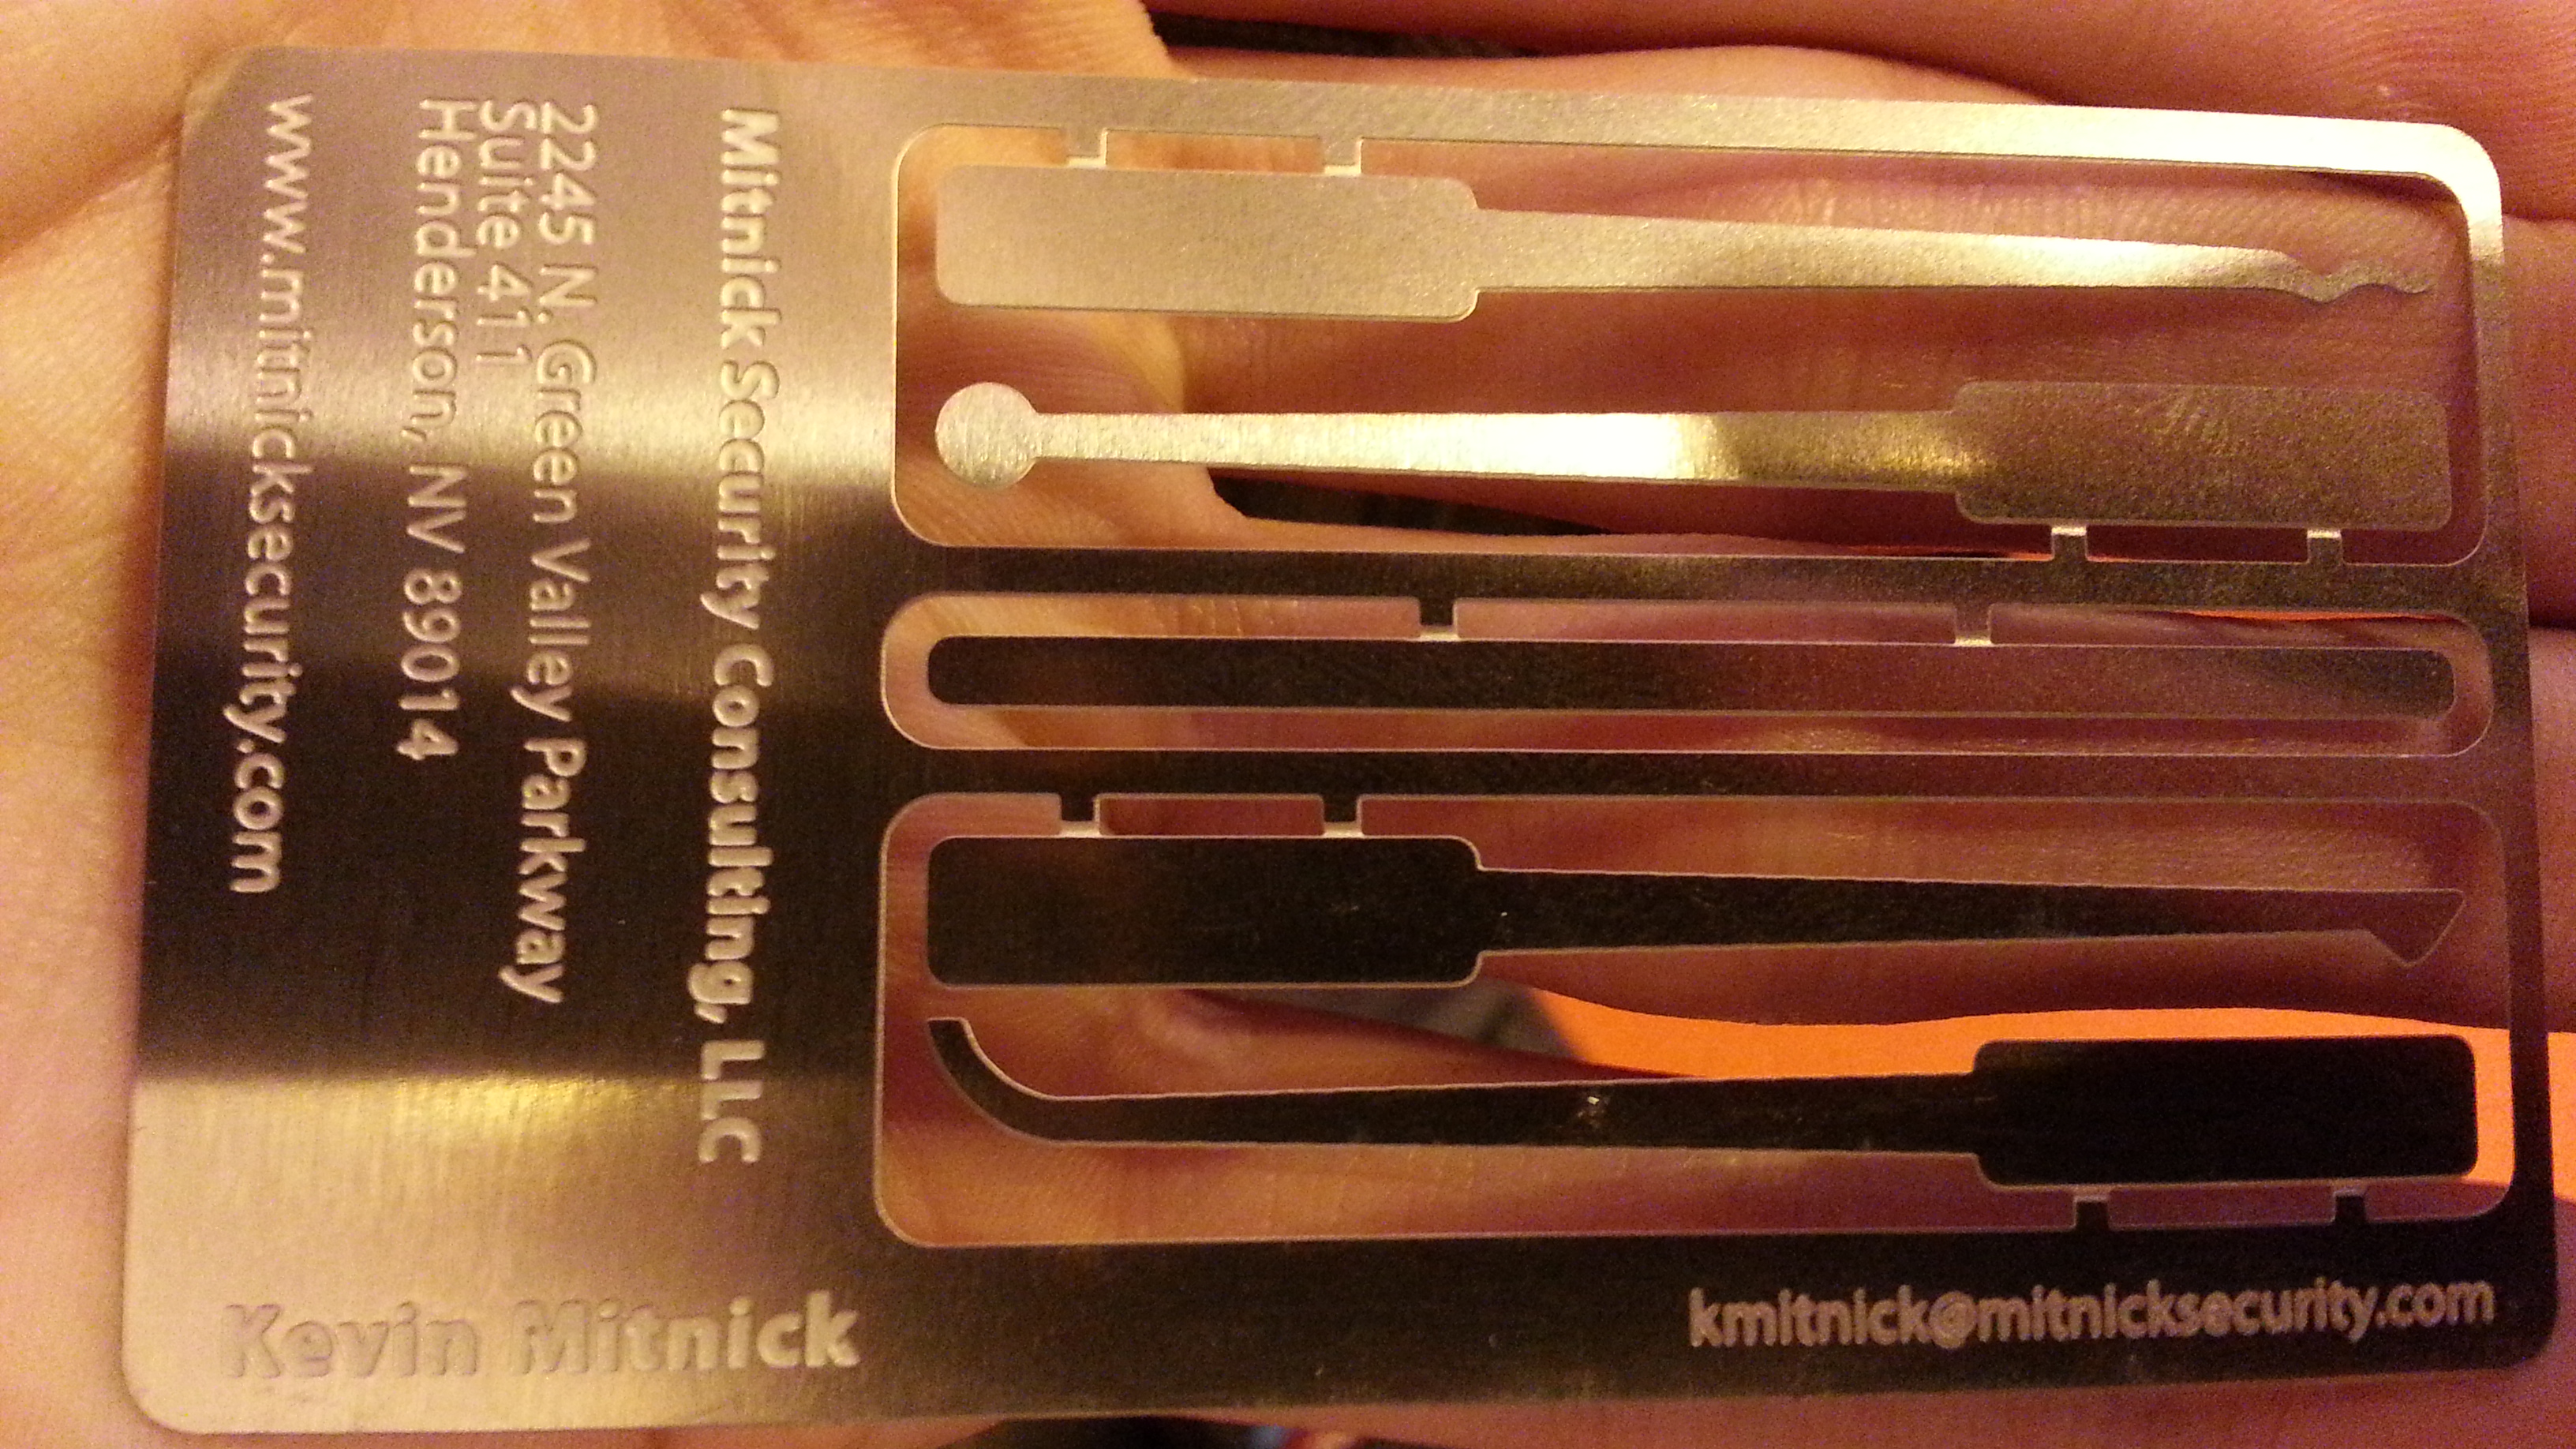 Kevin Mitnick metal business card IP EXPO 2013 London